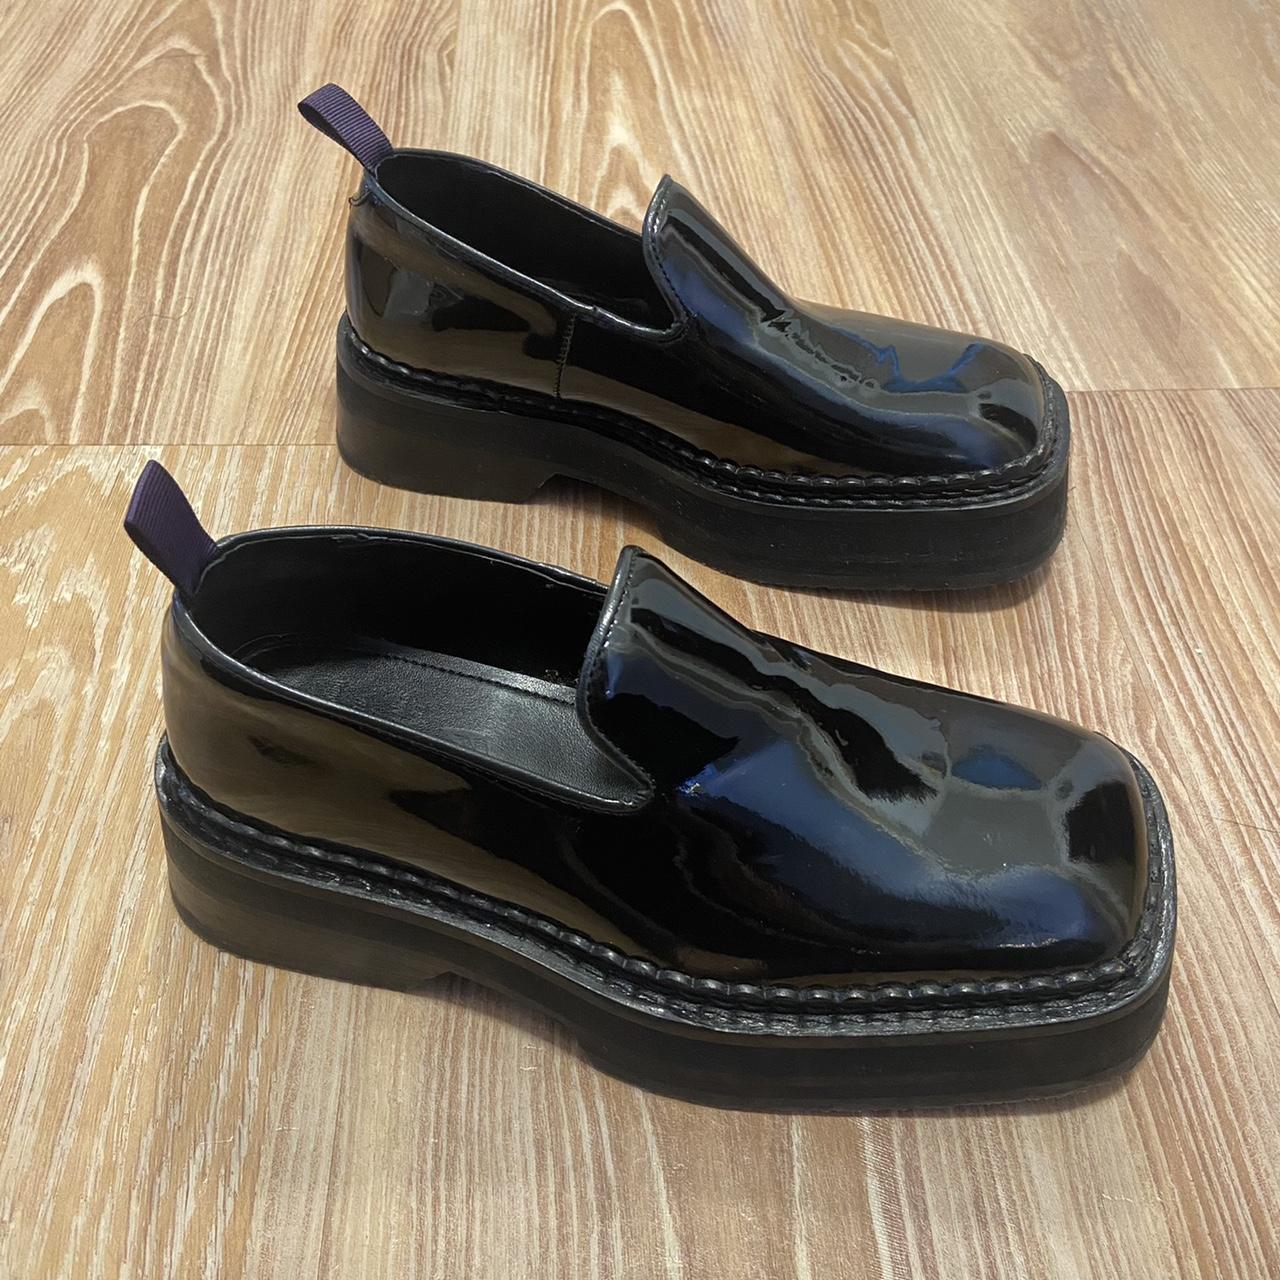 Eytys Black Patent Baccarat Loafers. , LIKE NEW.